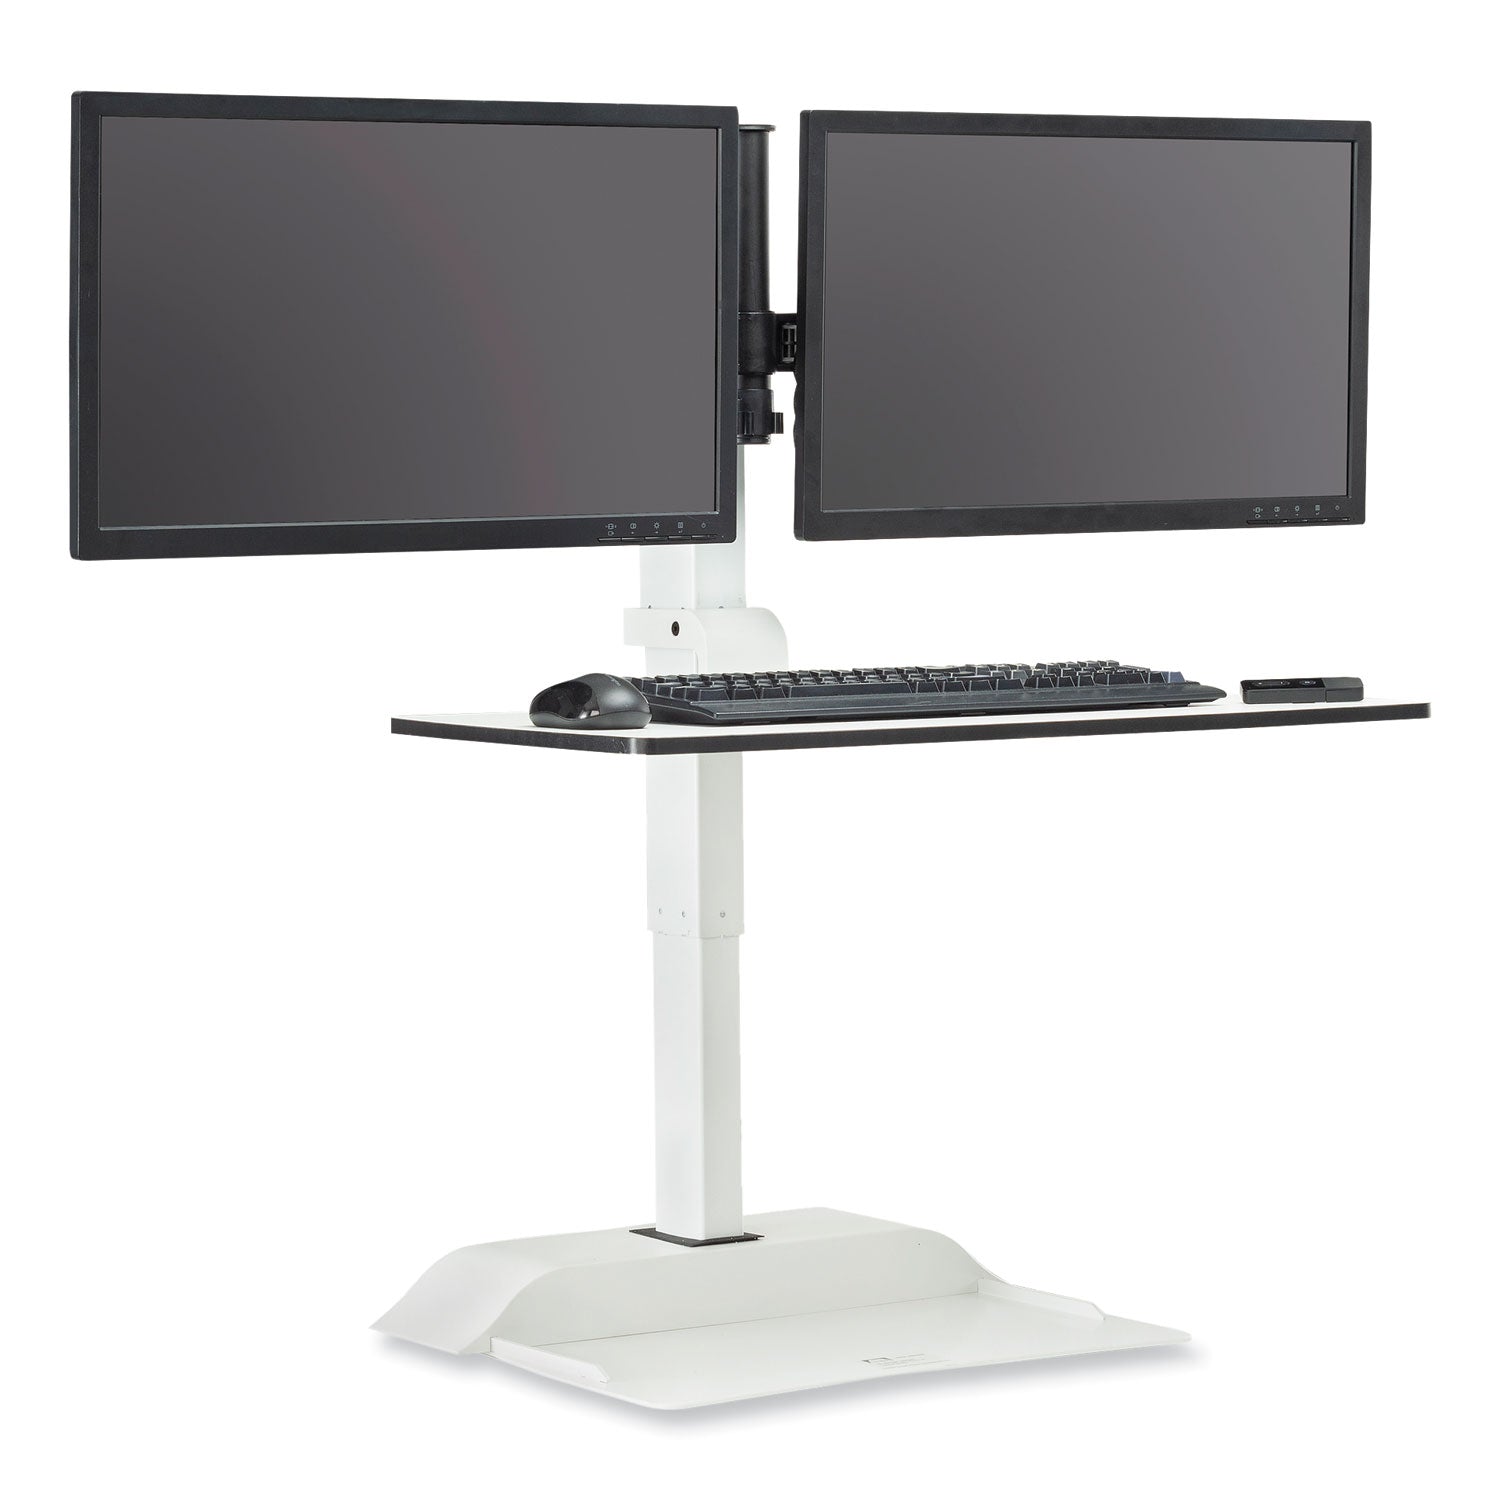 soar-electric-desktop-sit-stand-dual-monitor-arm-for-27-monitors-white-supports-10-lbs-ships-in-1-3-business-days_saf2193wh - 2